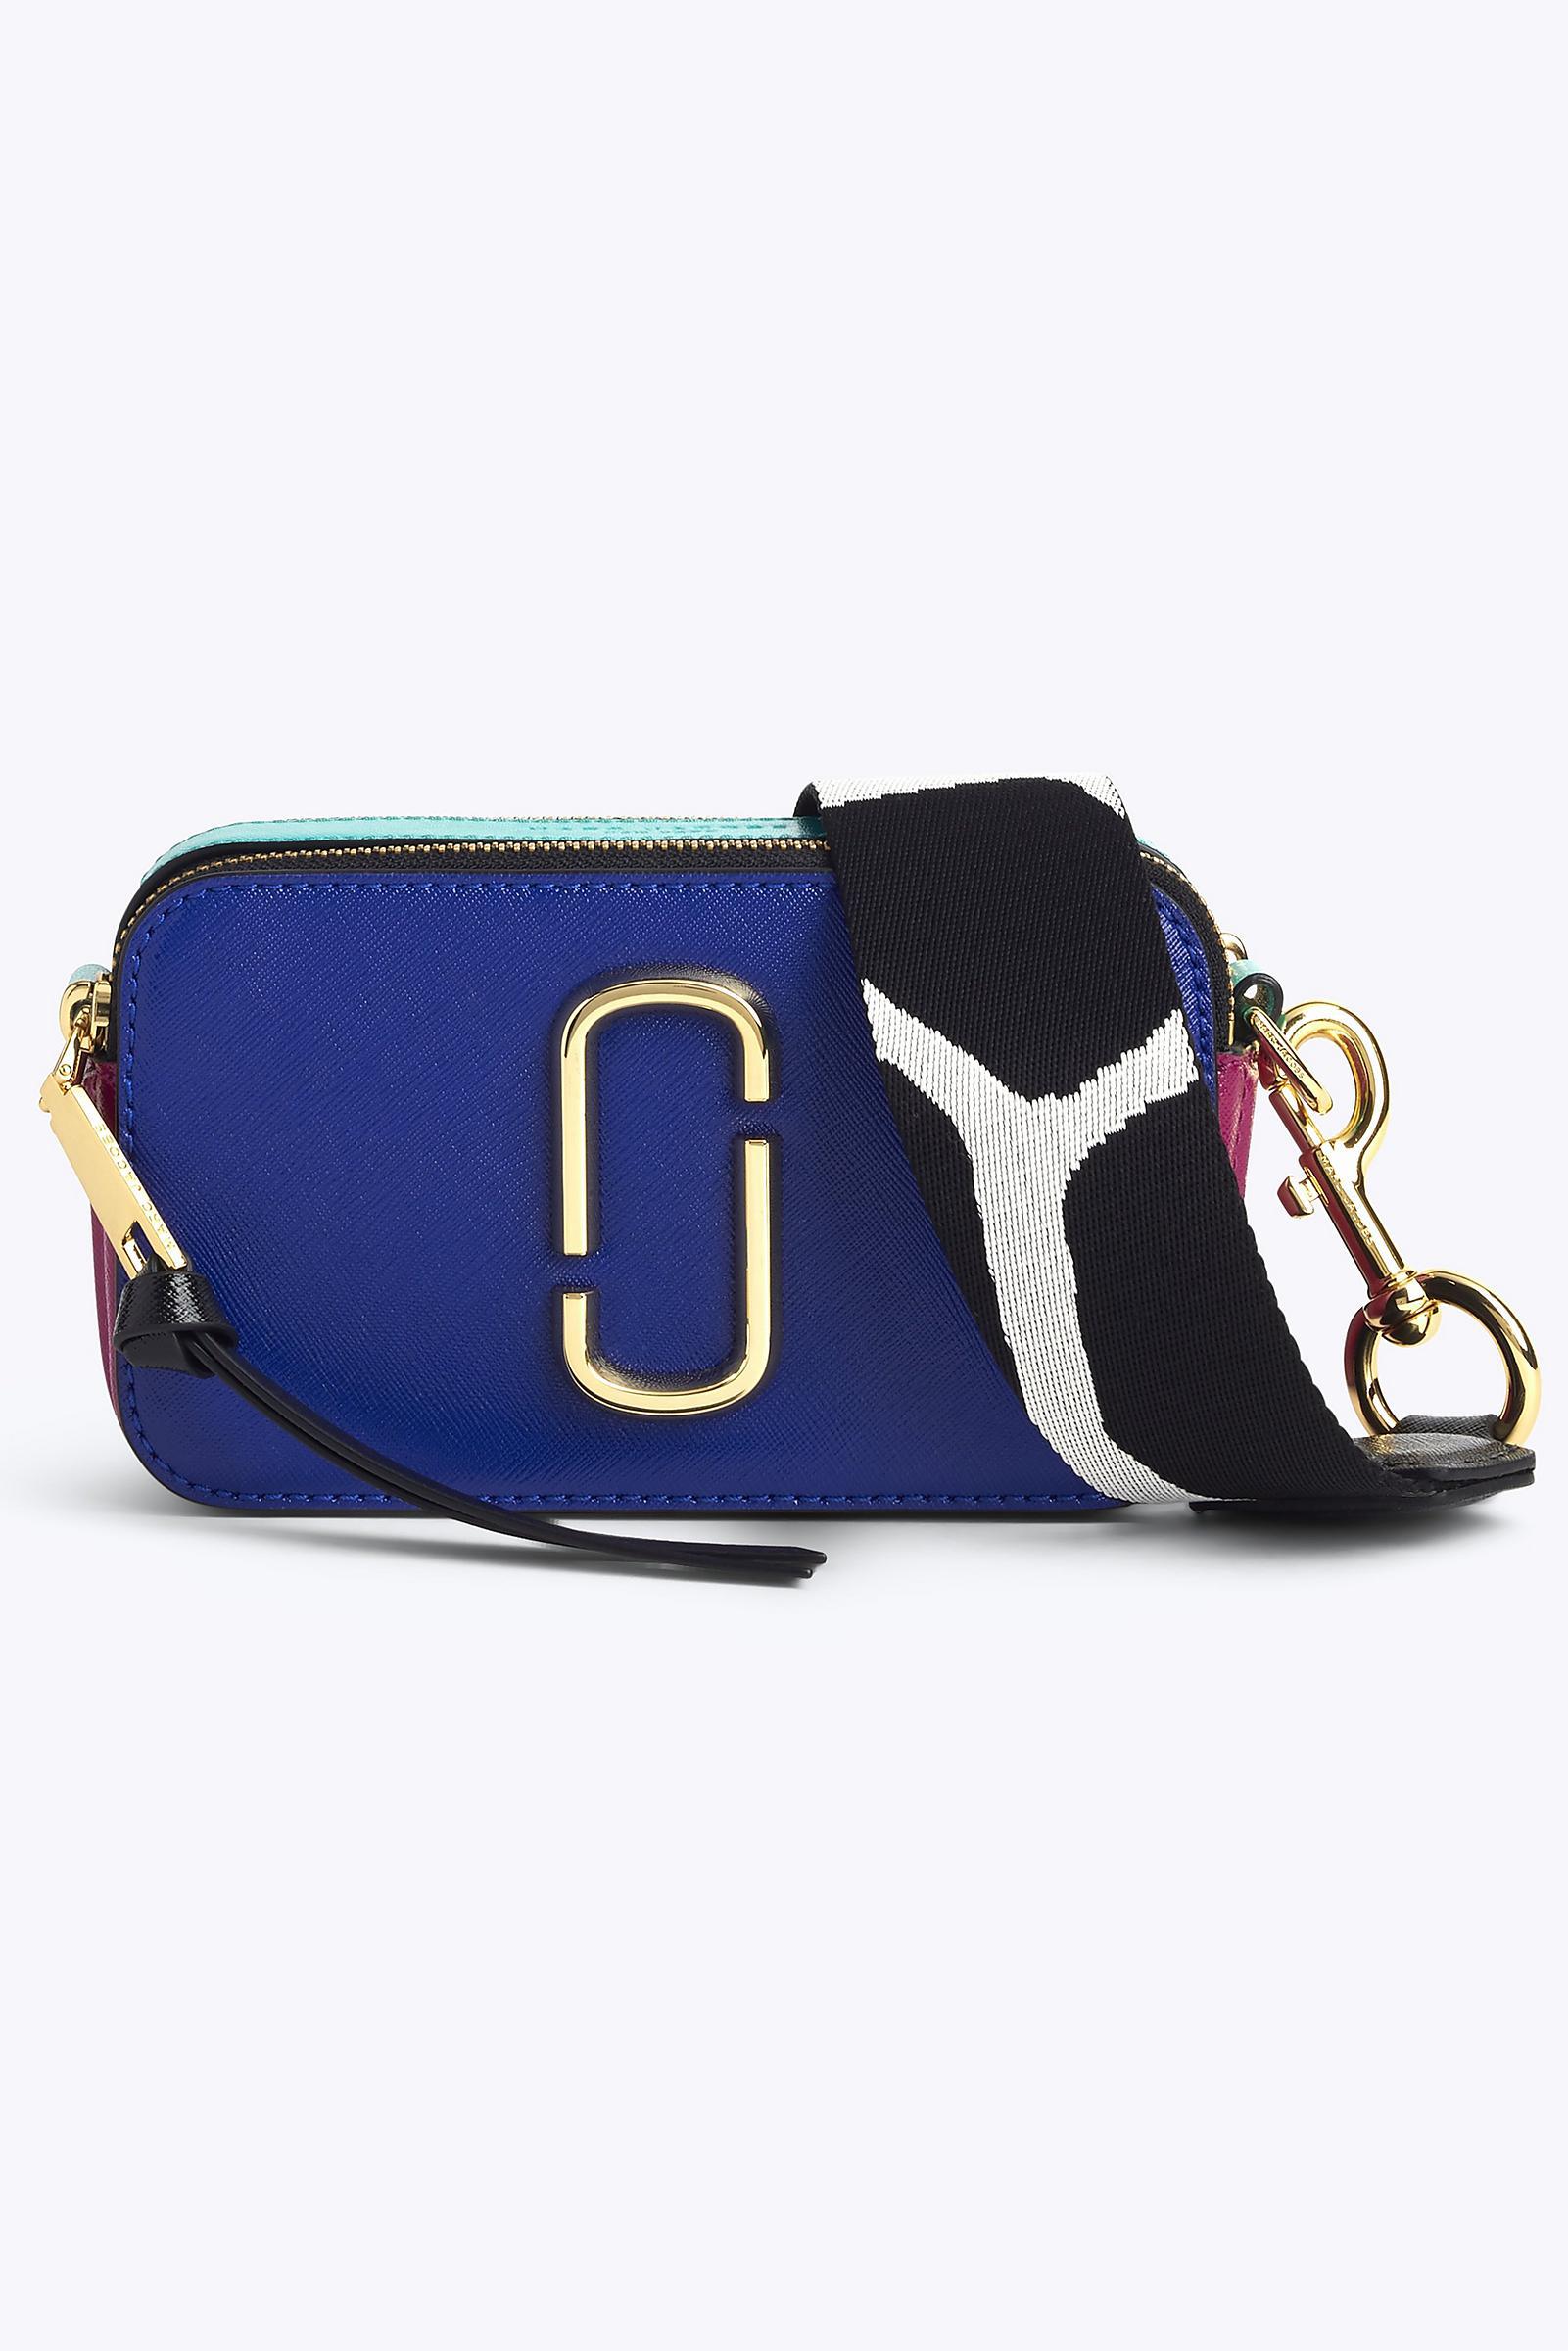 Marc Jacobs Snapshot Bag In Academy Blue Multi